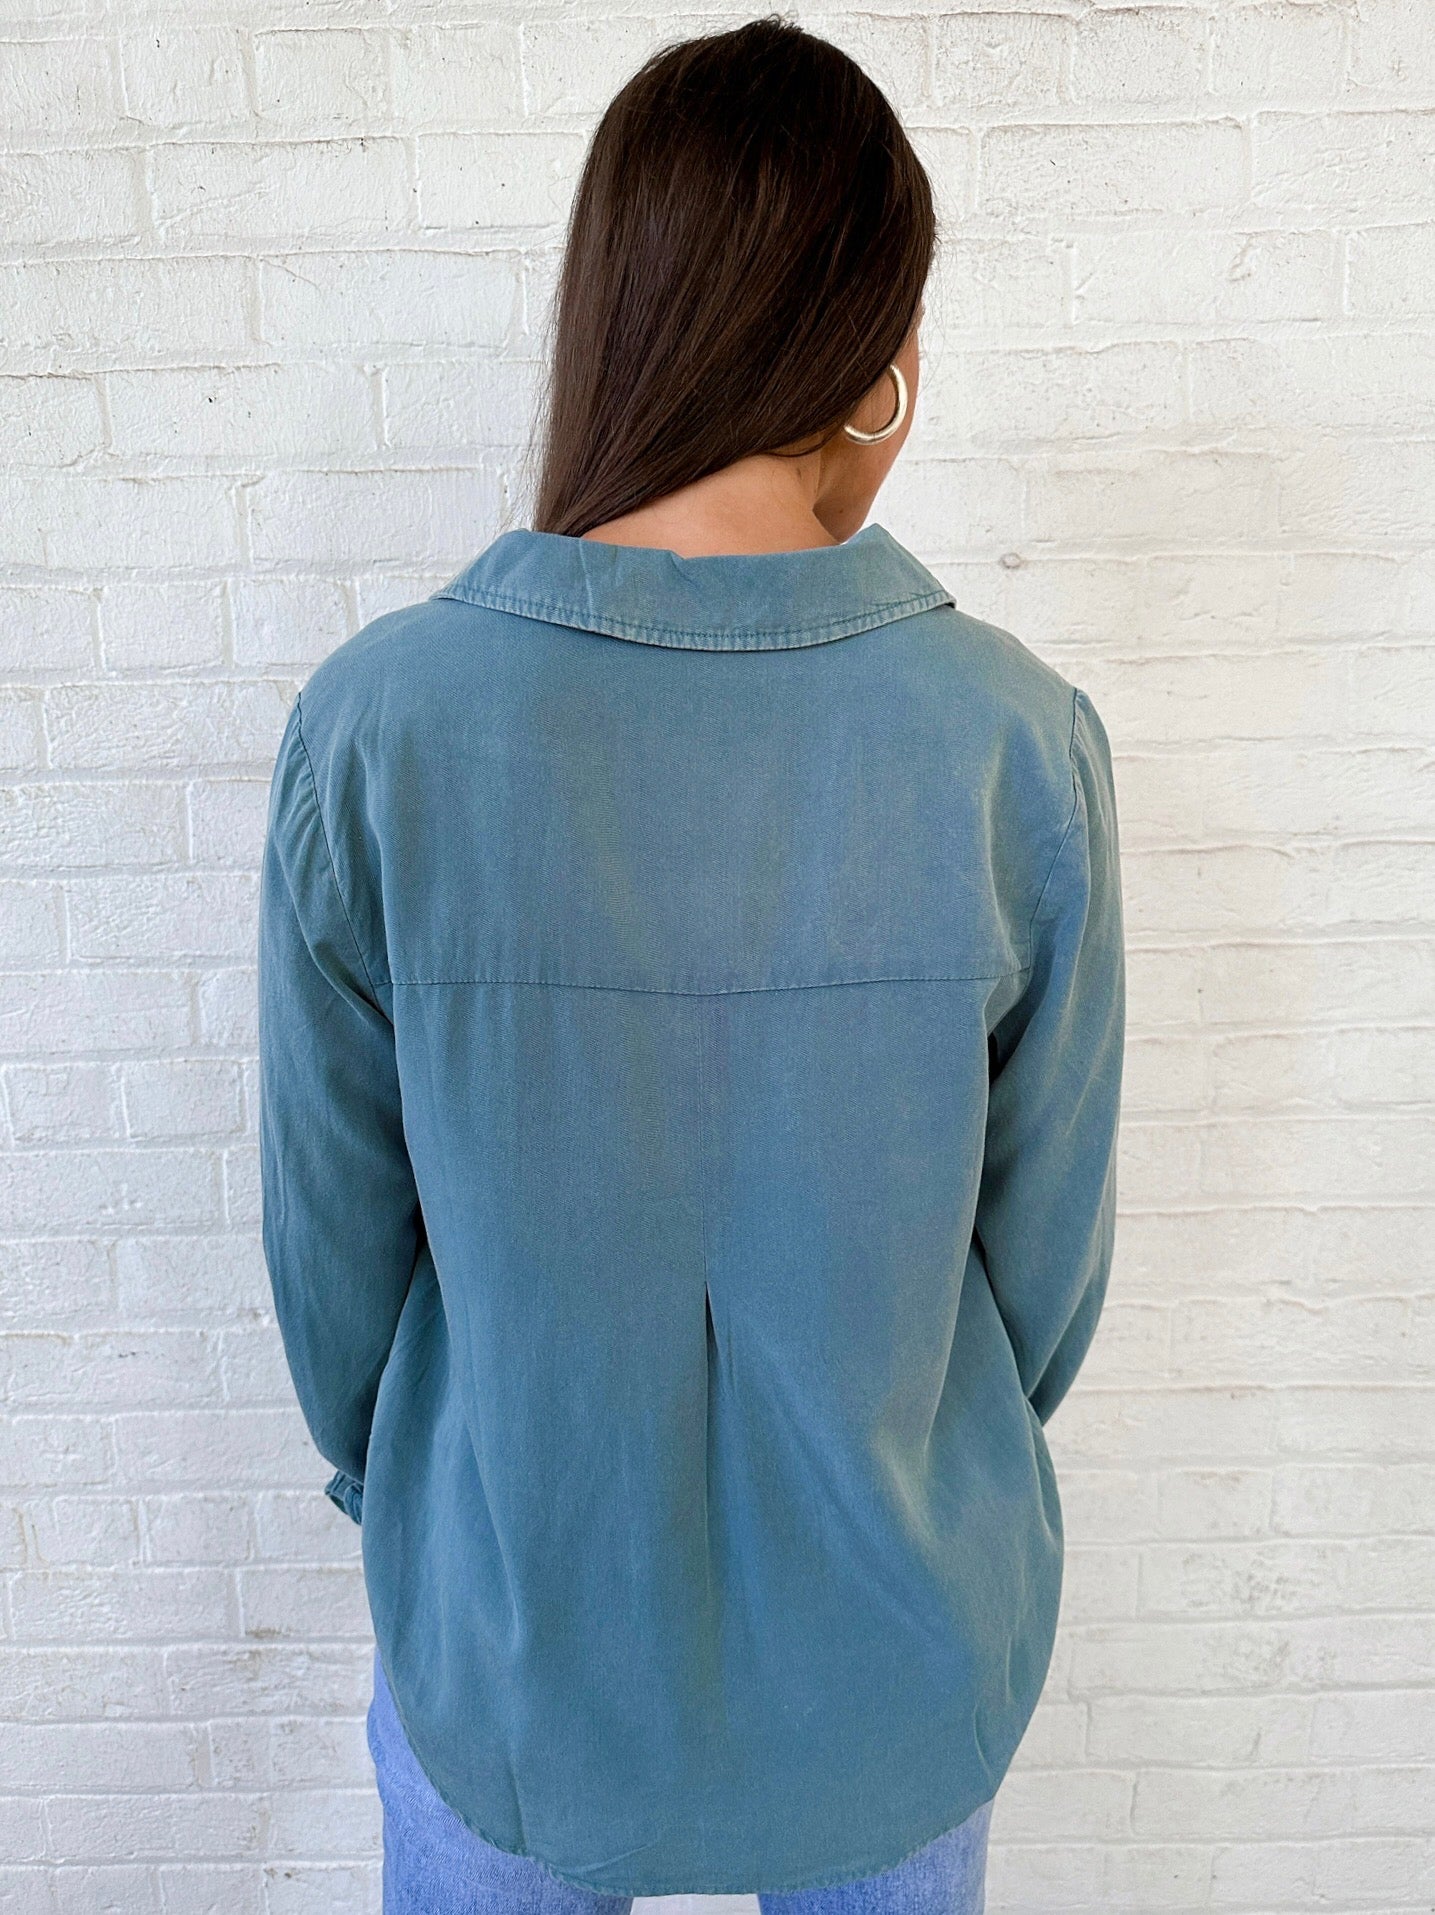 Working Day Blouse-Teal